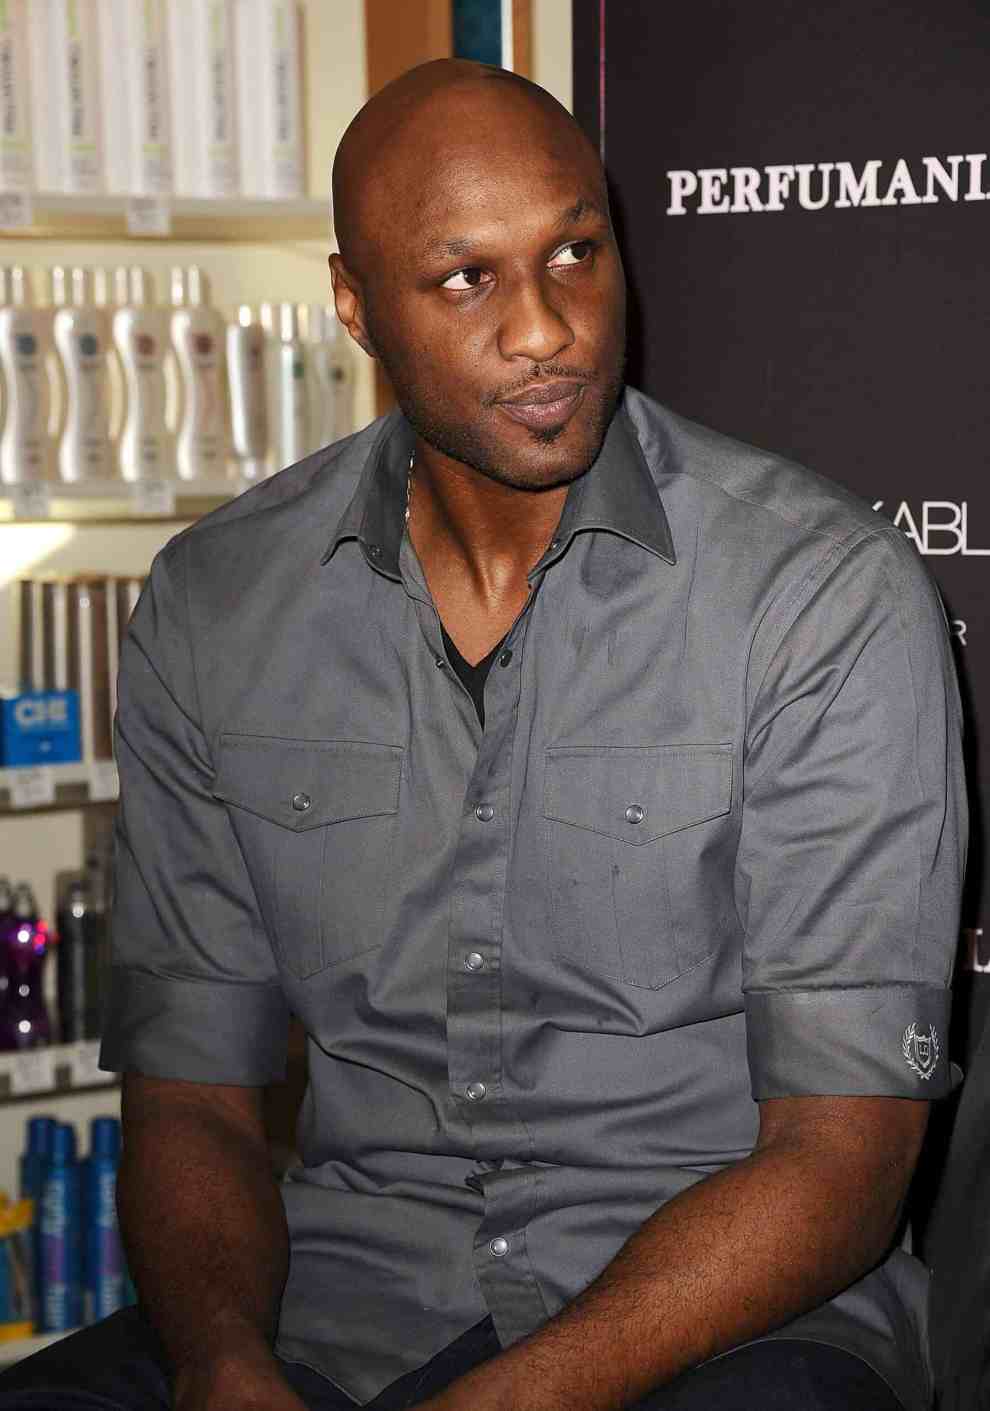 Lamar Odom makes a personal appearance for 'Unbreakable Bond' at Perfumania